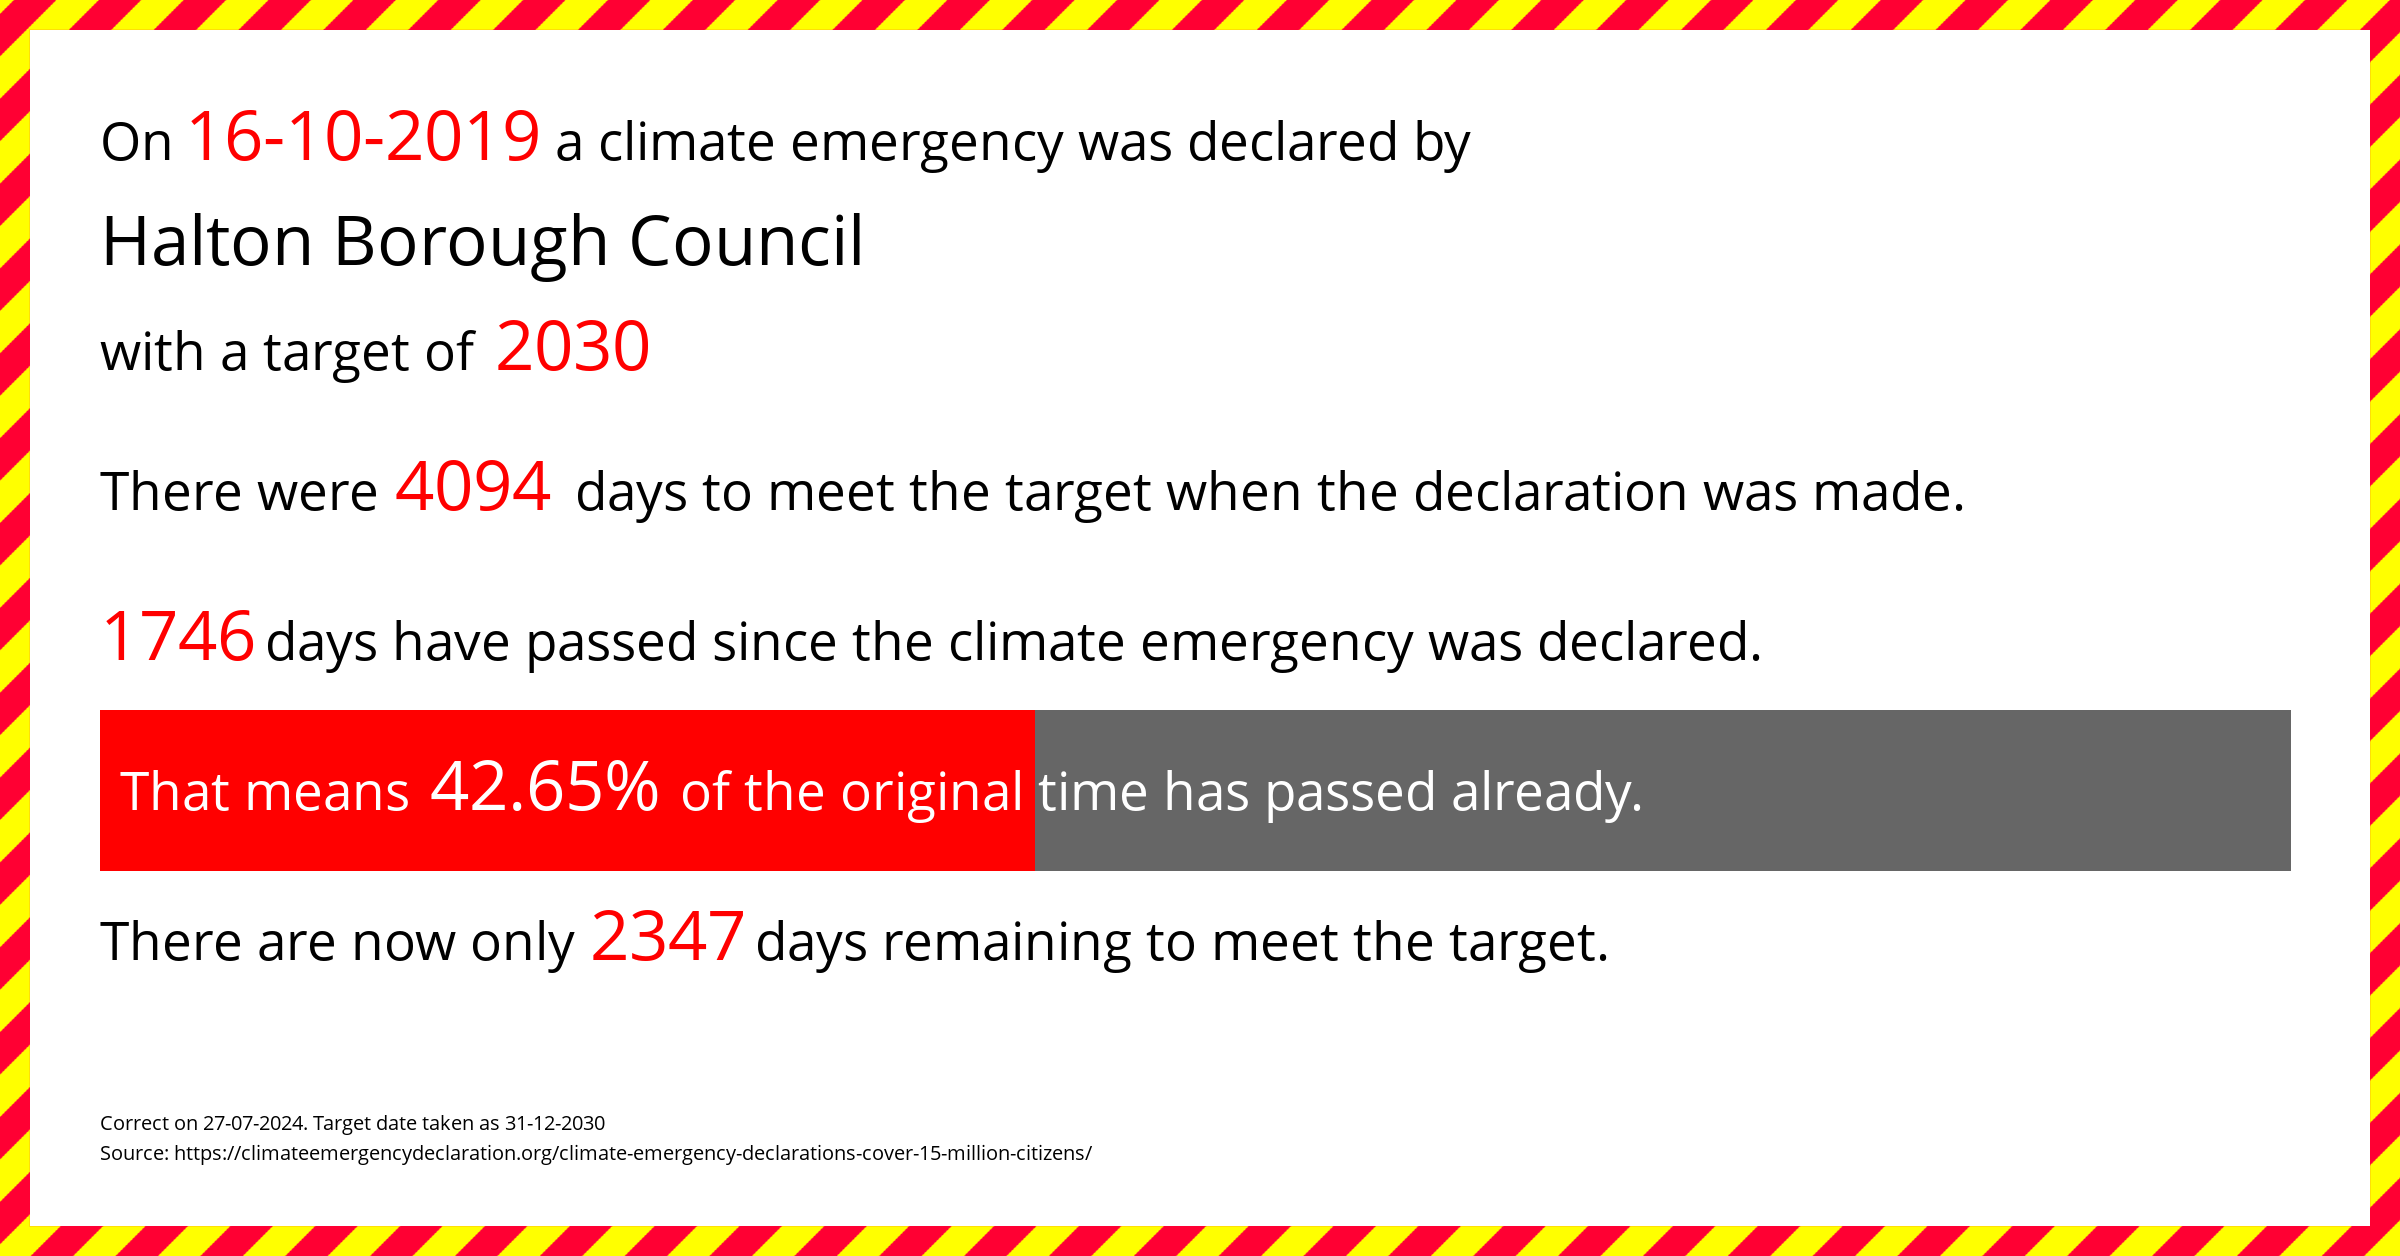 Halton Borough Council declared a Climate emergency on Wednesday 16th October 2019, with a target of 2030.